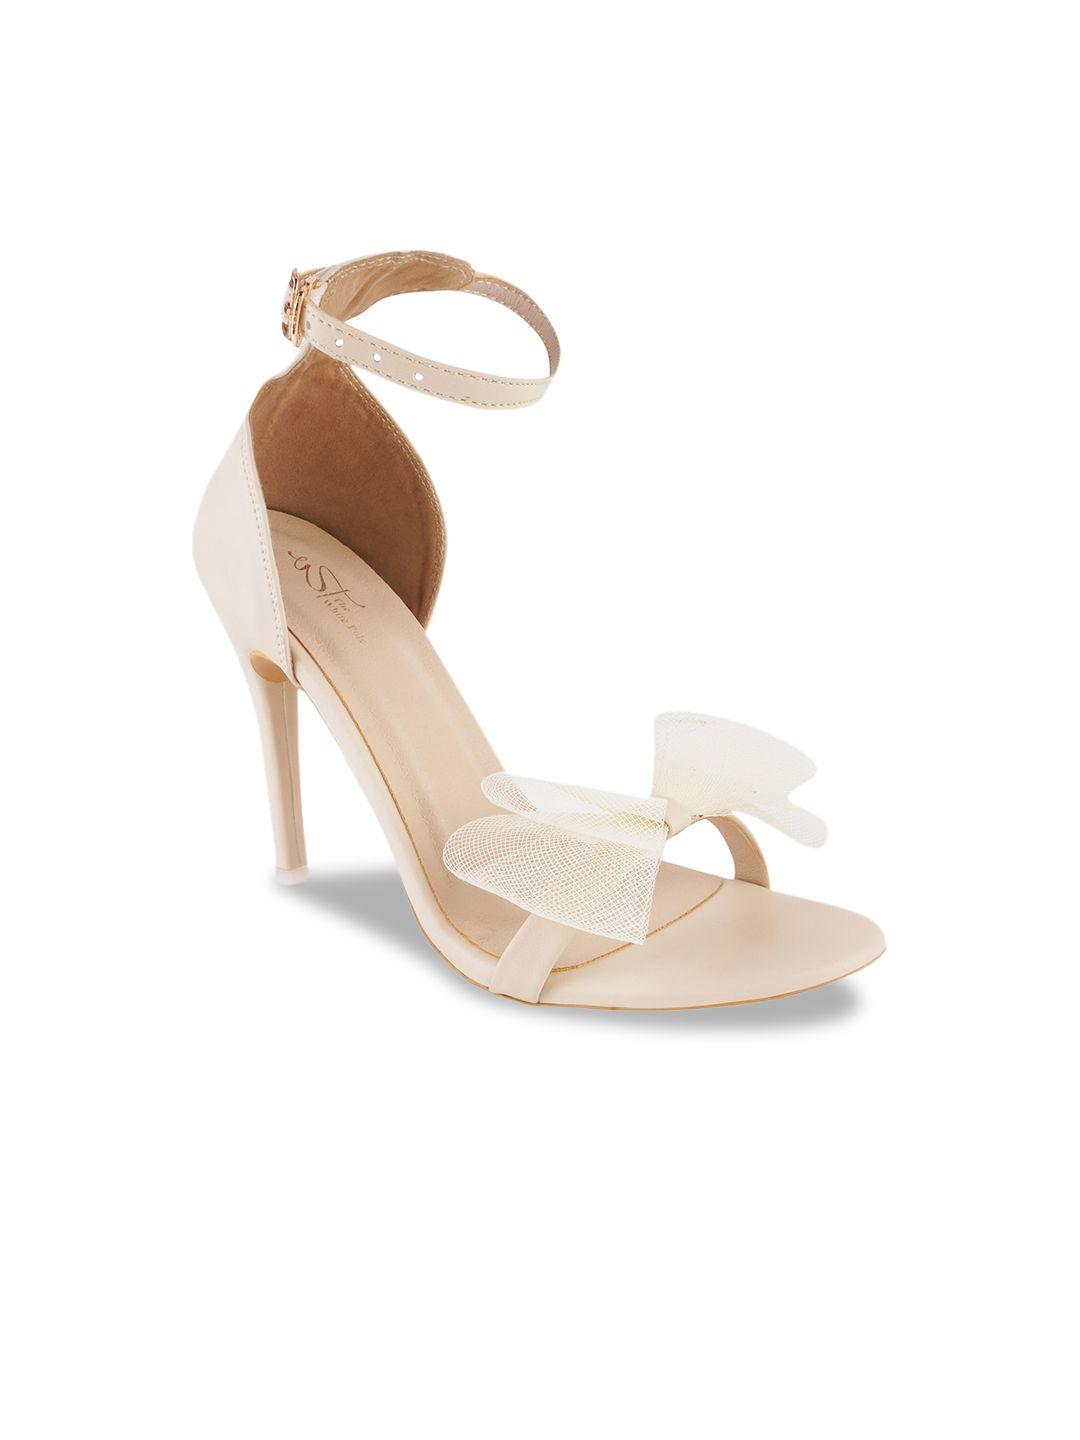 the white pole open toe stiletto heels with bows & ankle loop